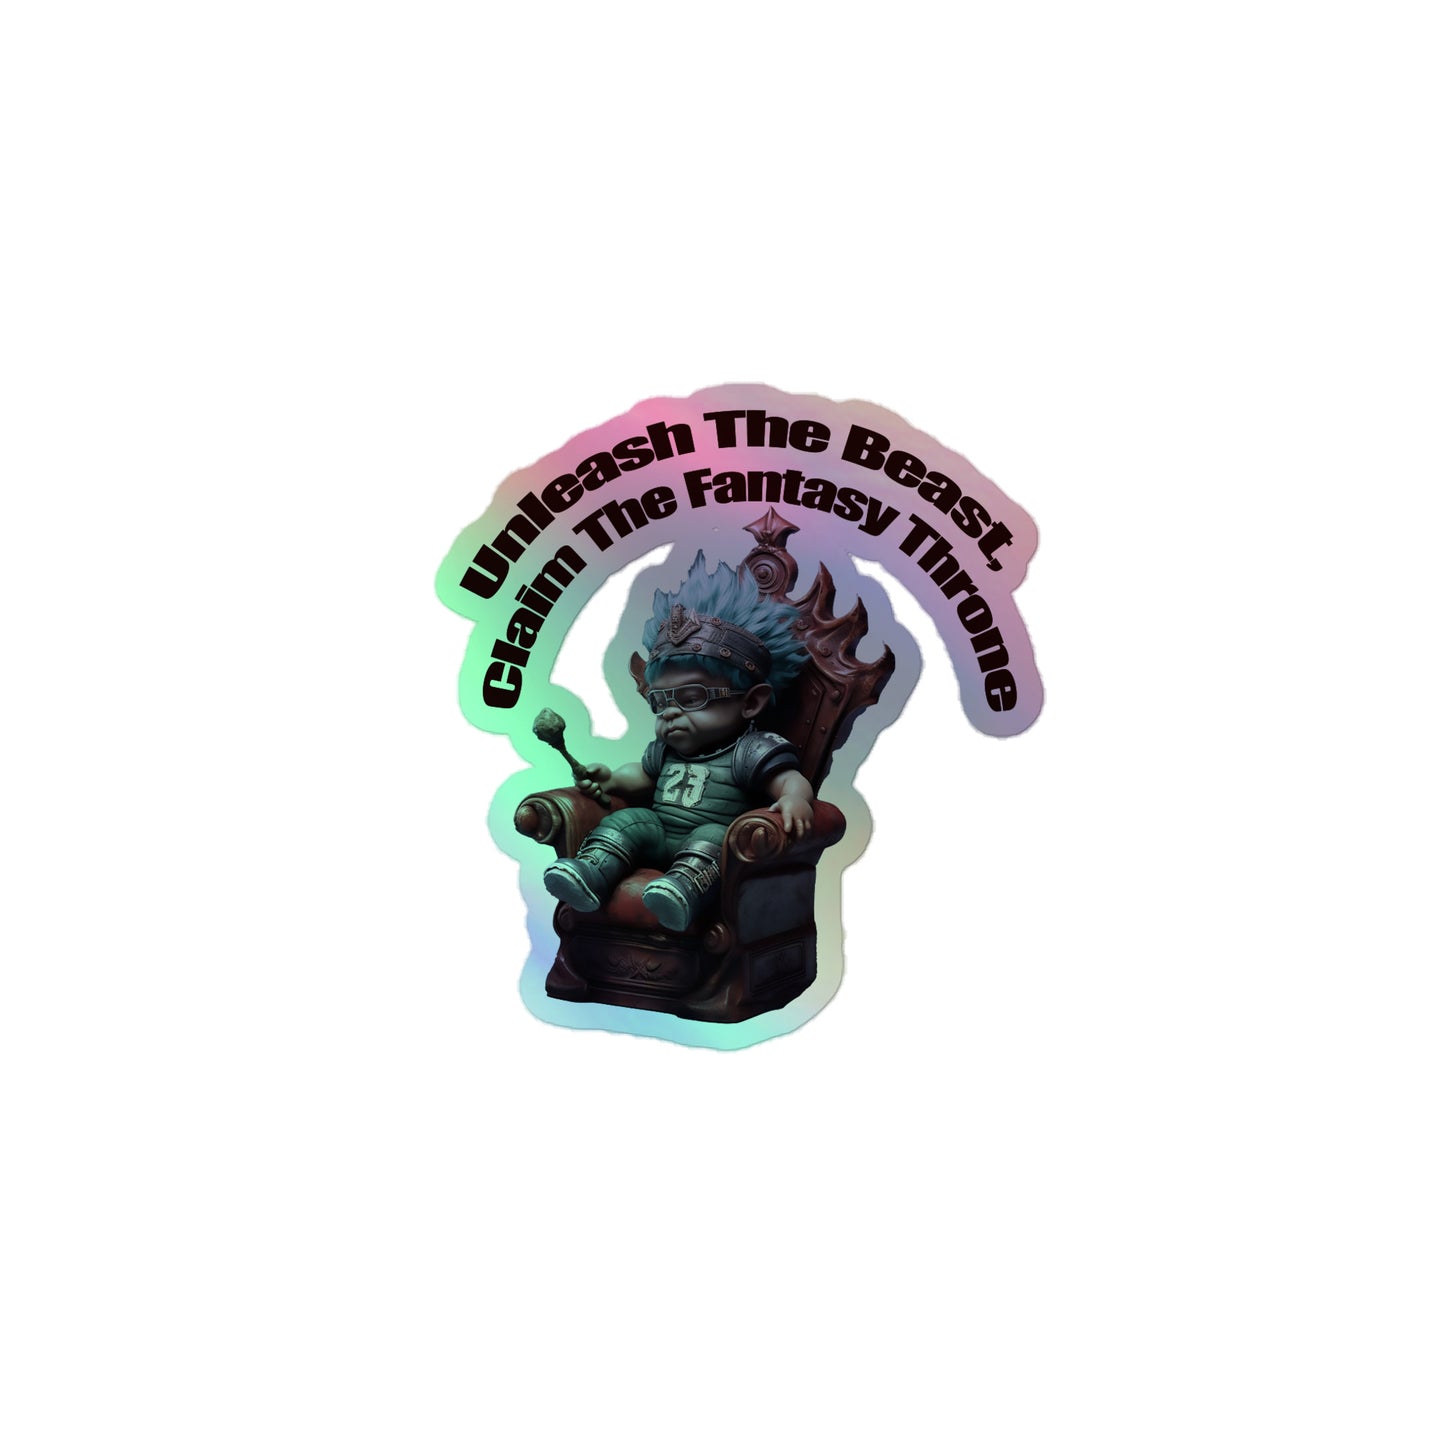 Gridiron King Holographic stickers